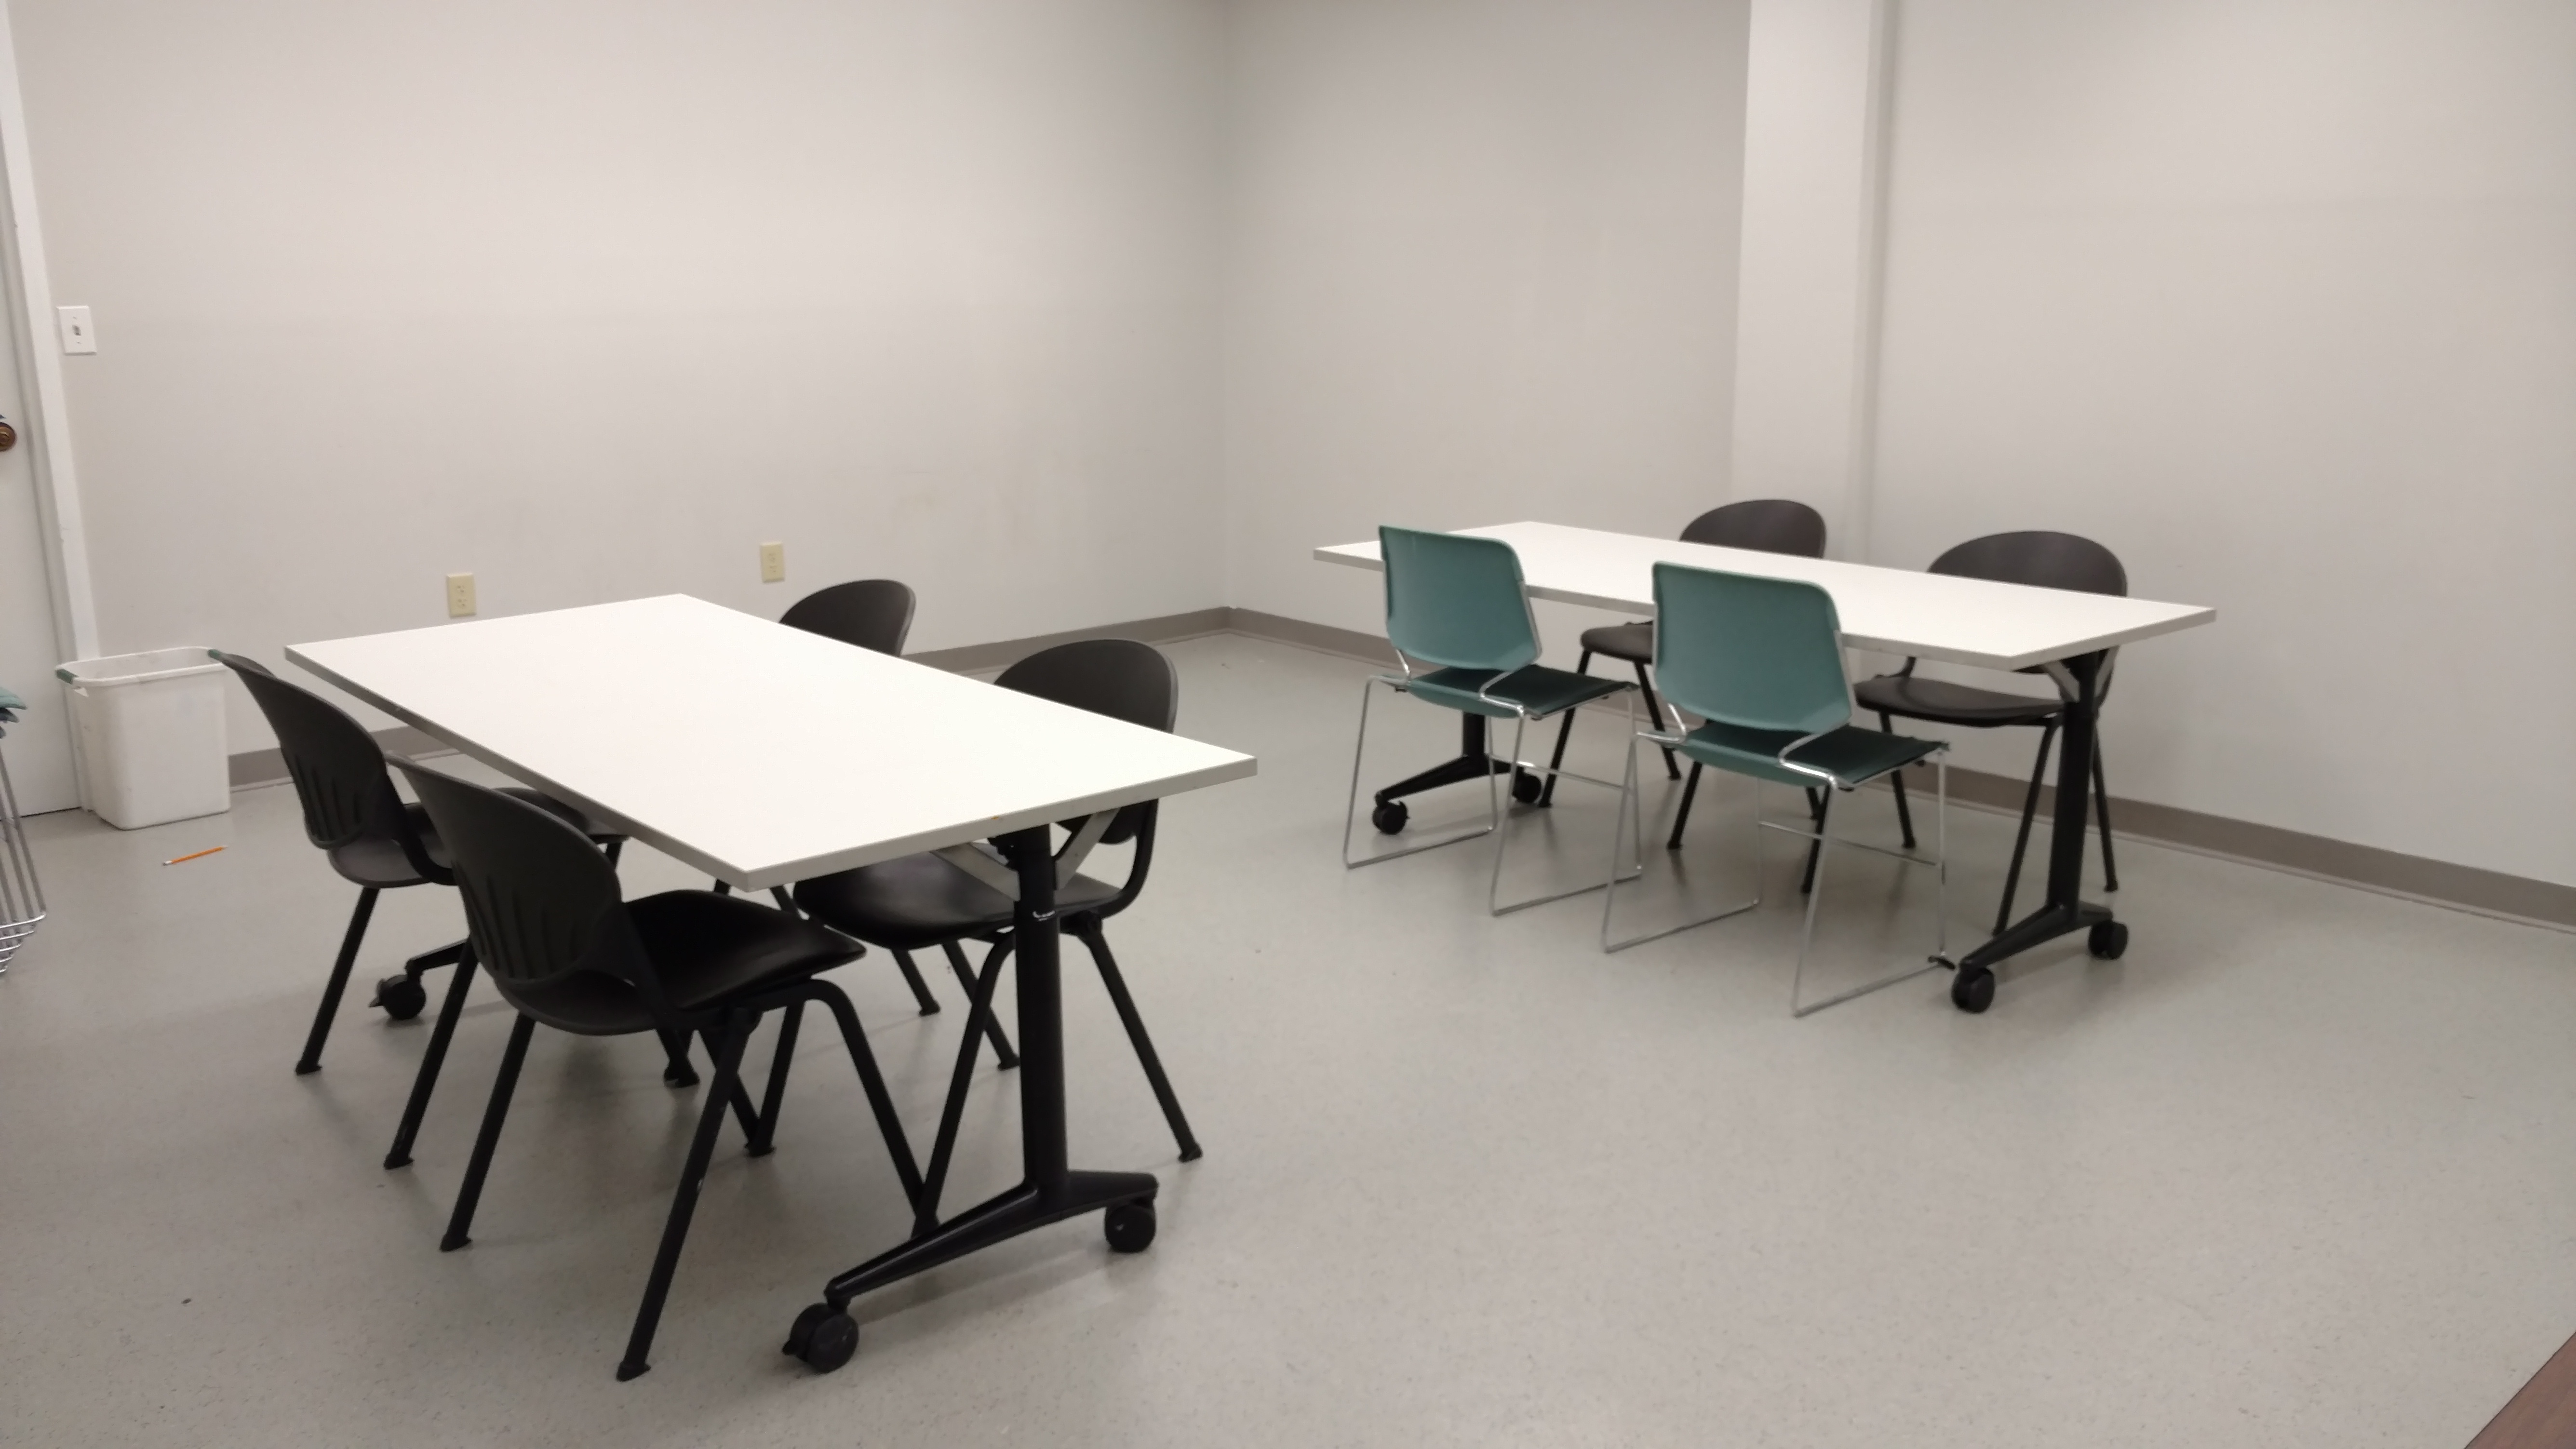 Small meeting room equipped with two rectangular tables with four chairs at each table